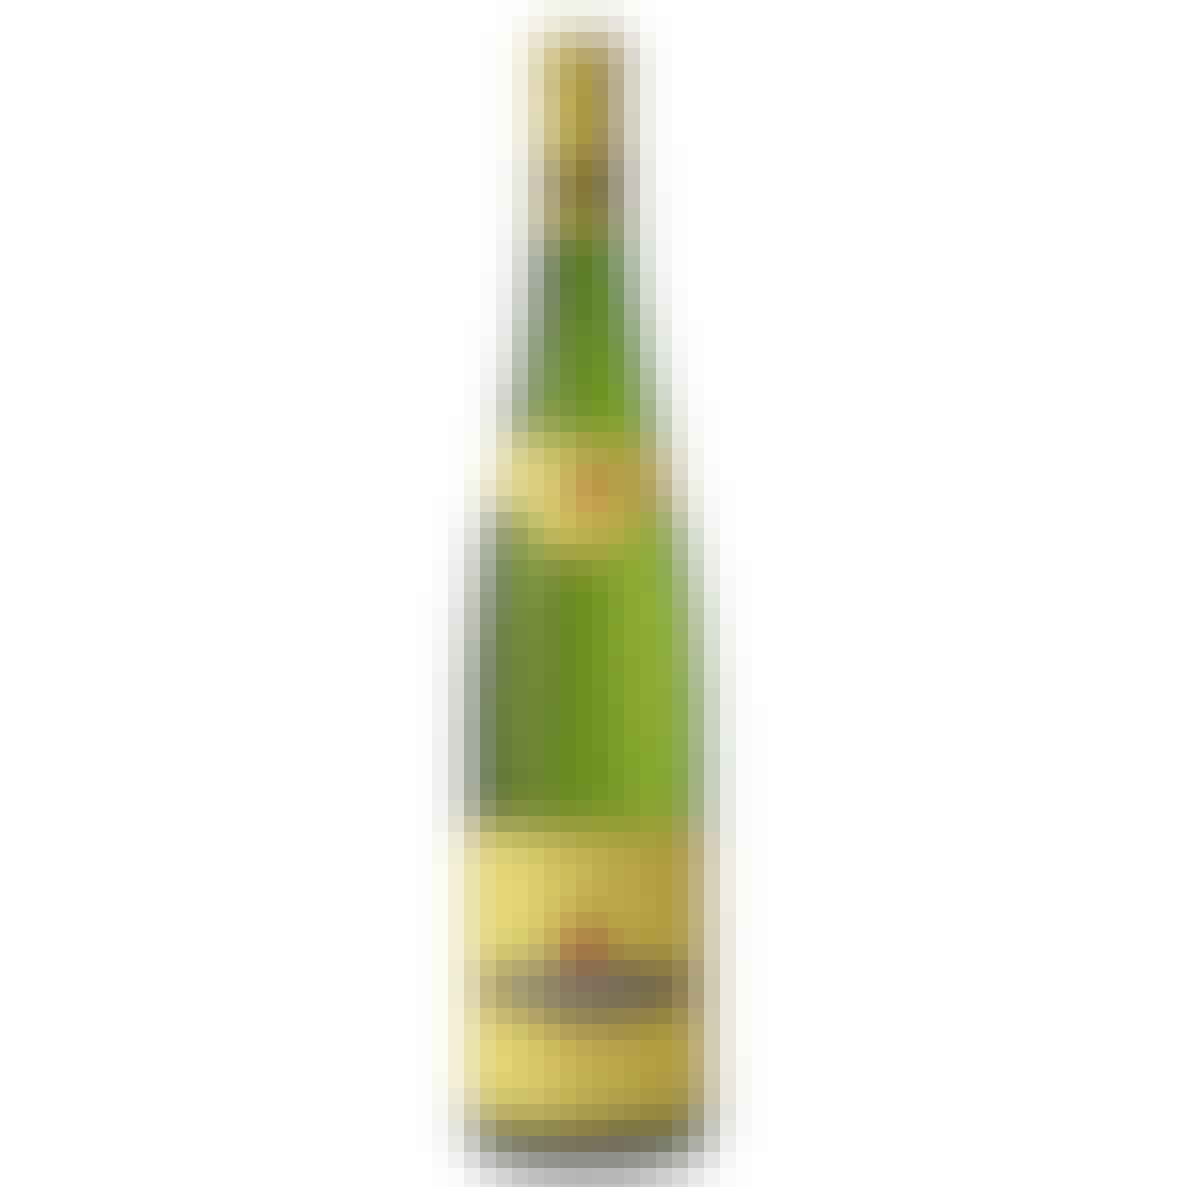 Trimbach Riesling 2018 750ml